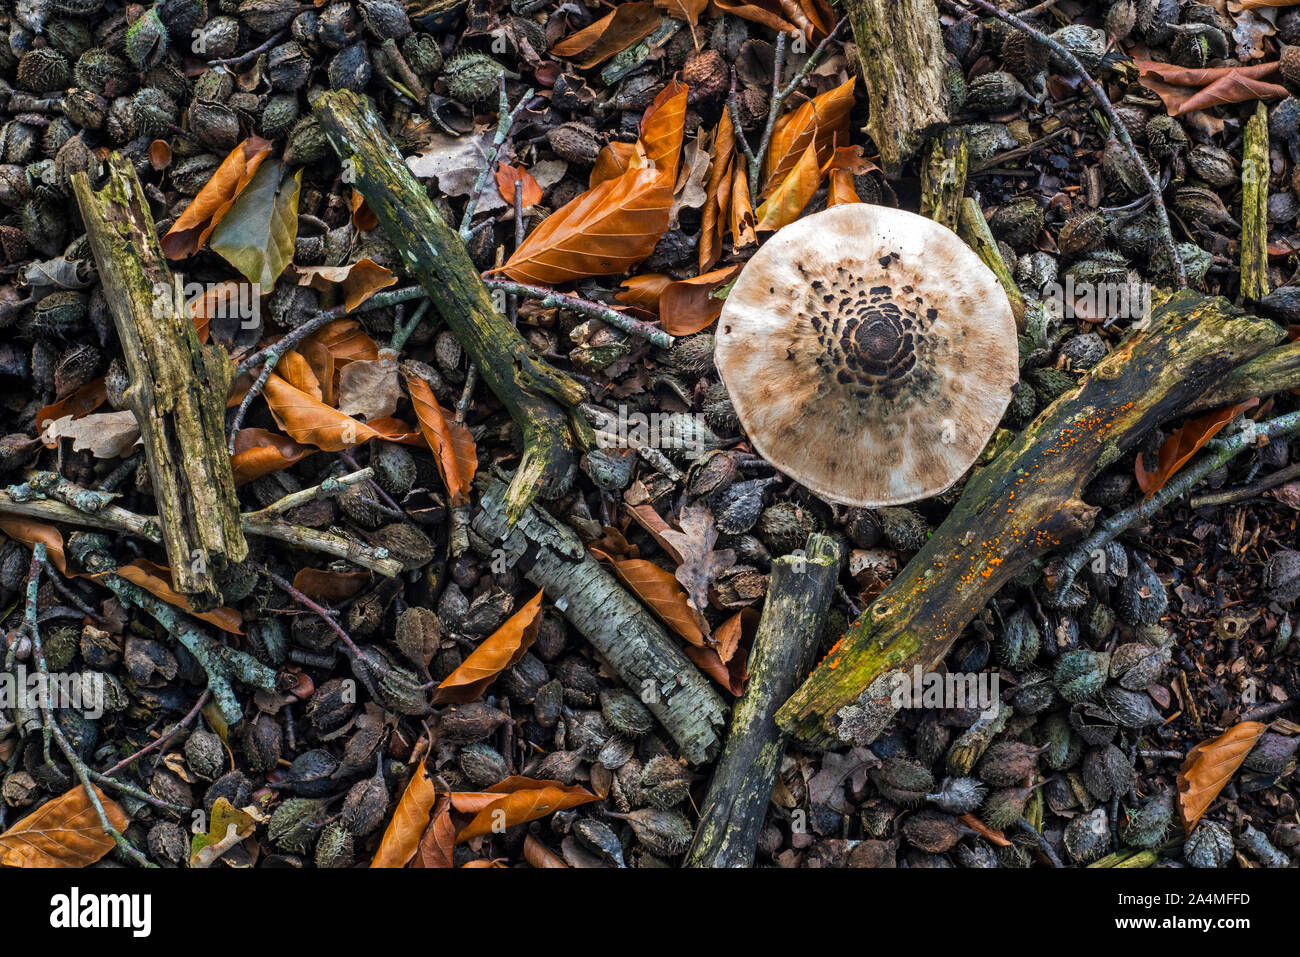 Parasol mushroom (Macrolepiota procera) and fallen beech nuts / cupules / husks on the forest floor in autumn / fall Stock Photo